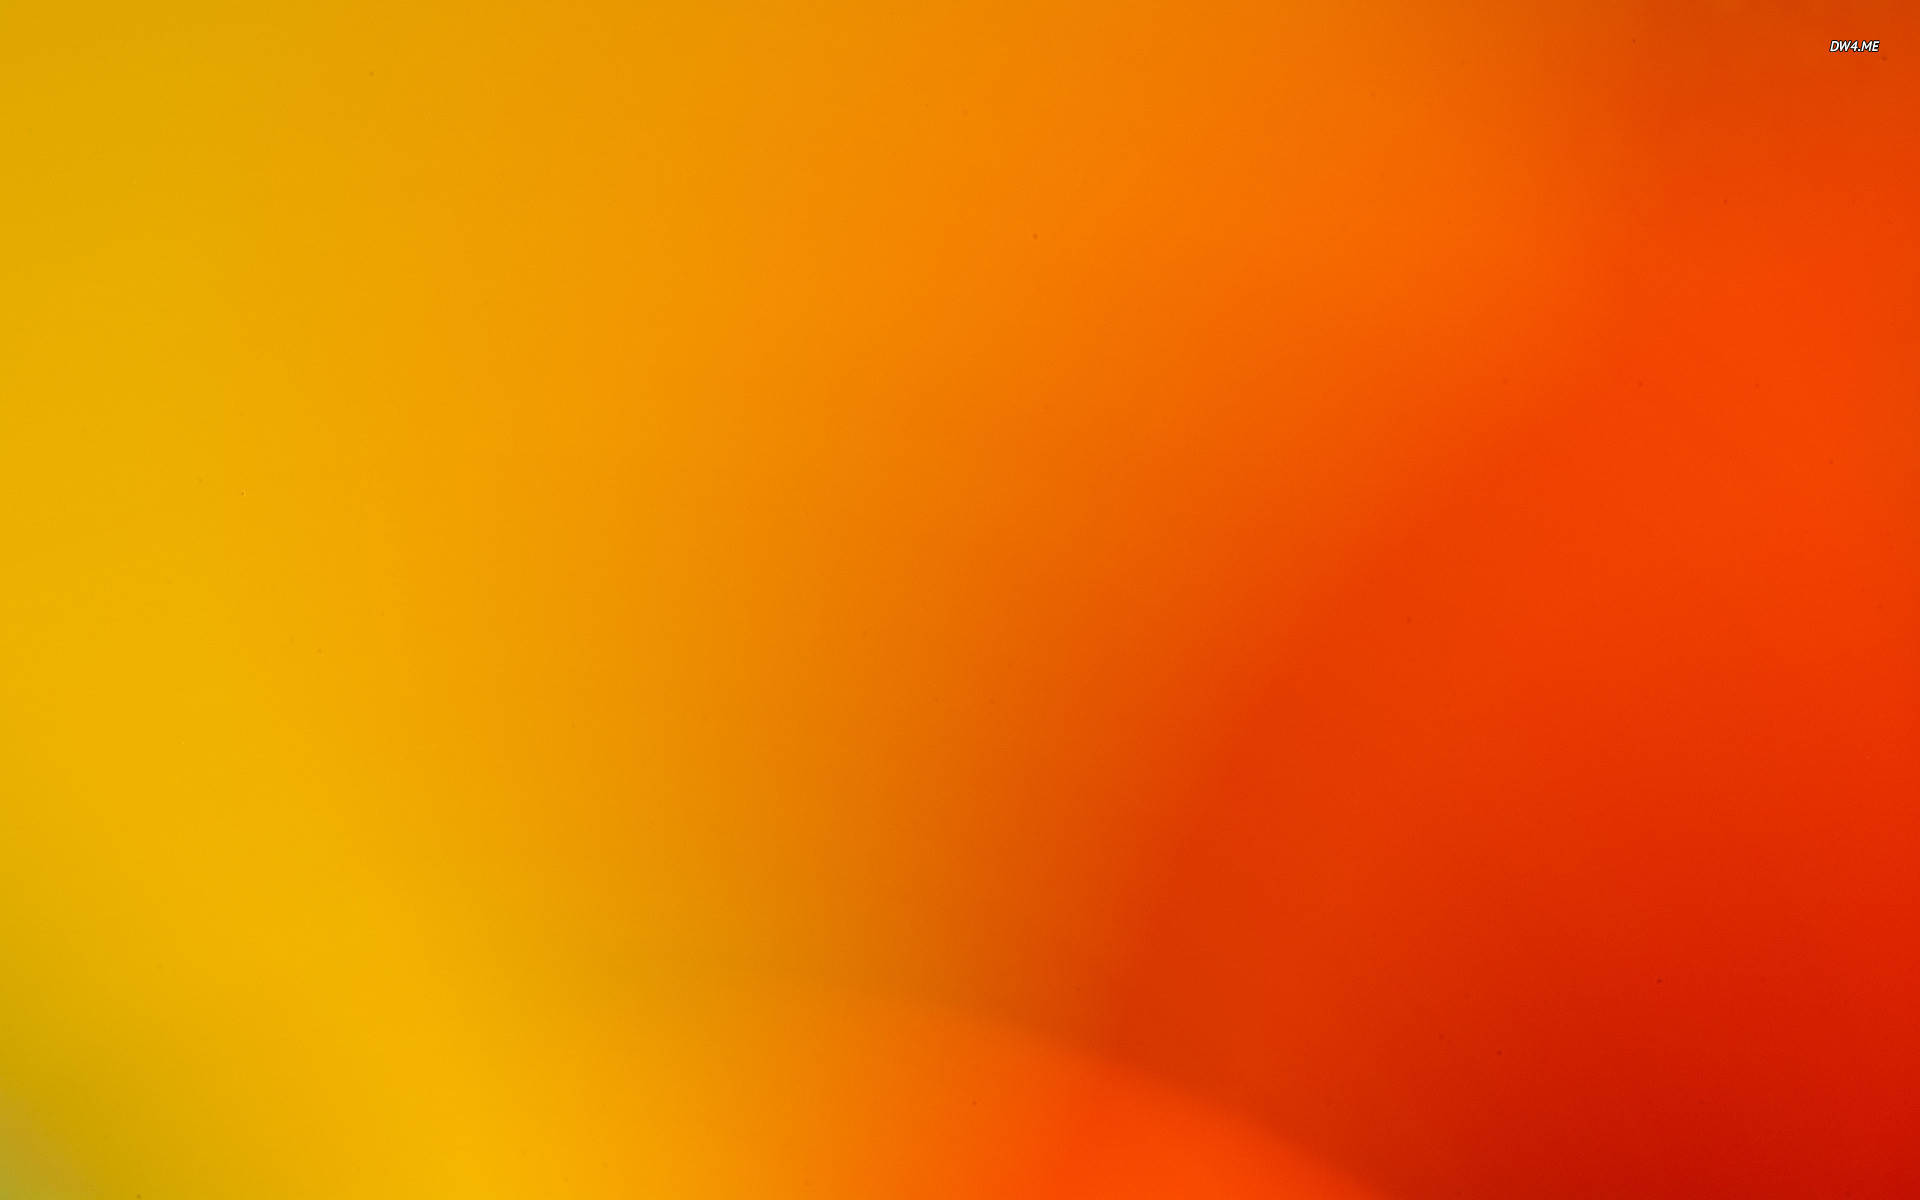 100+] Orange And Yellow Wallpapers | Wallpapers.com